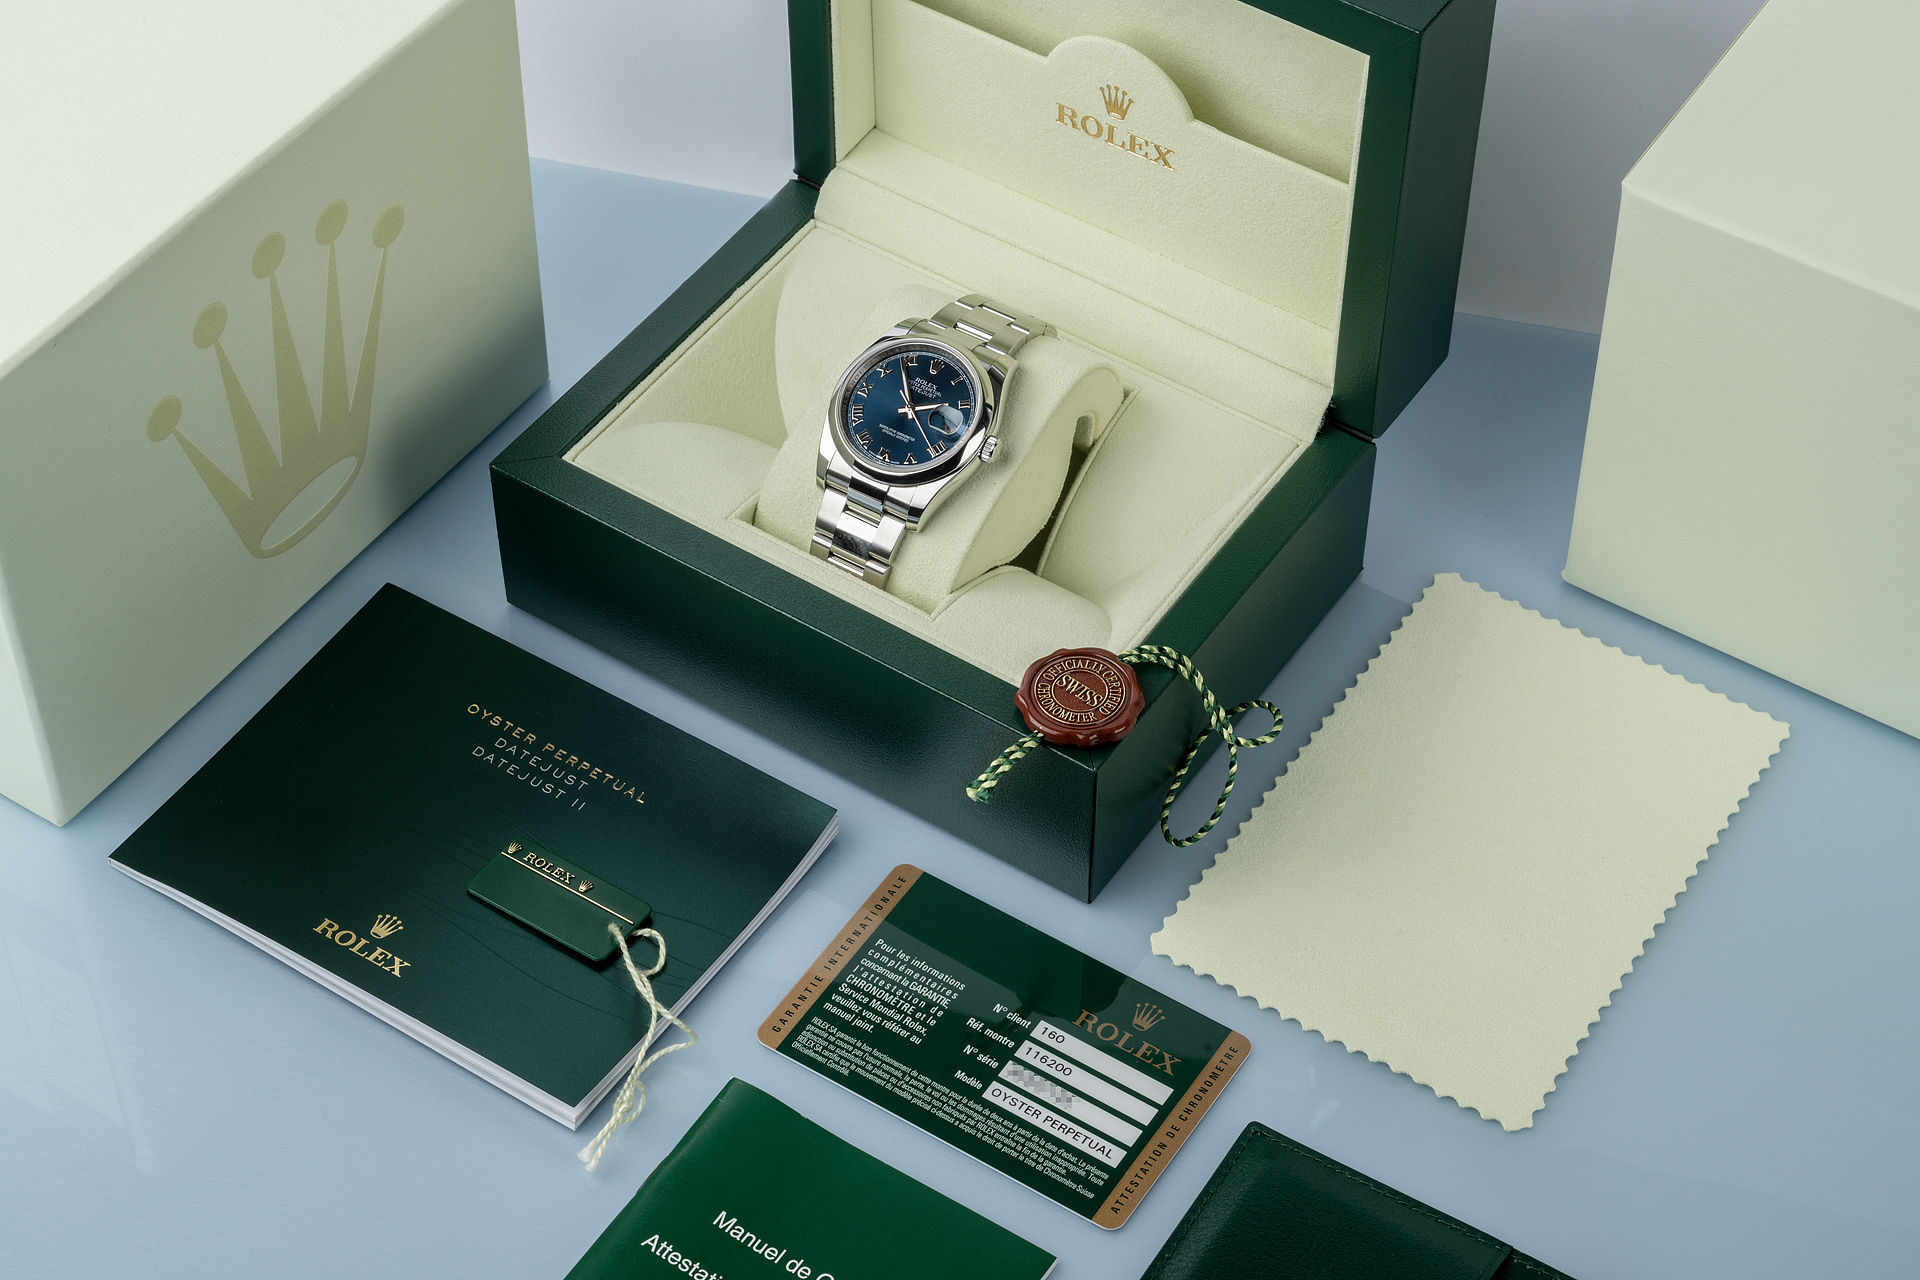 ref 116200 | 'Complete Set' Box & Papers  | Rolex Datejust